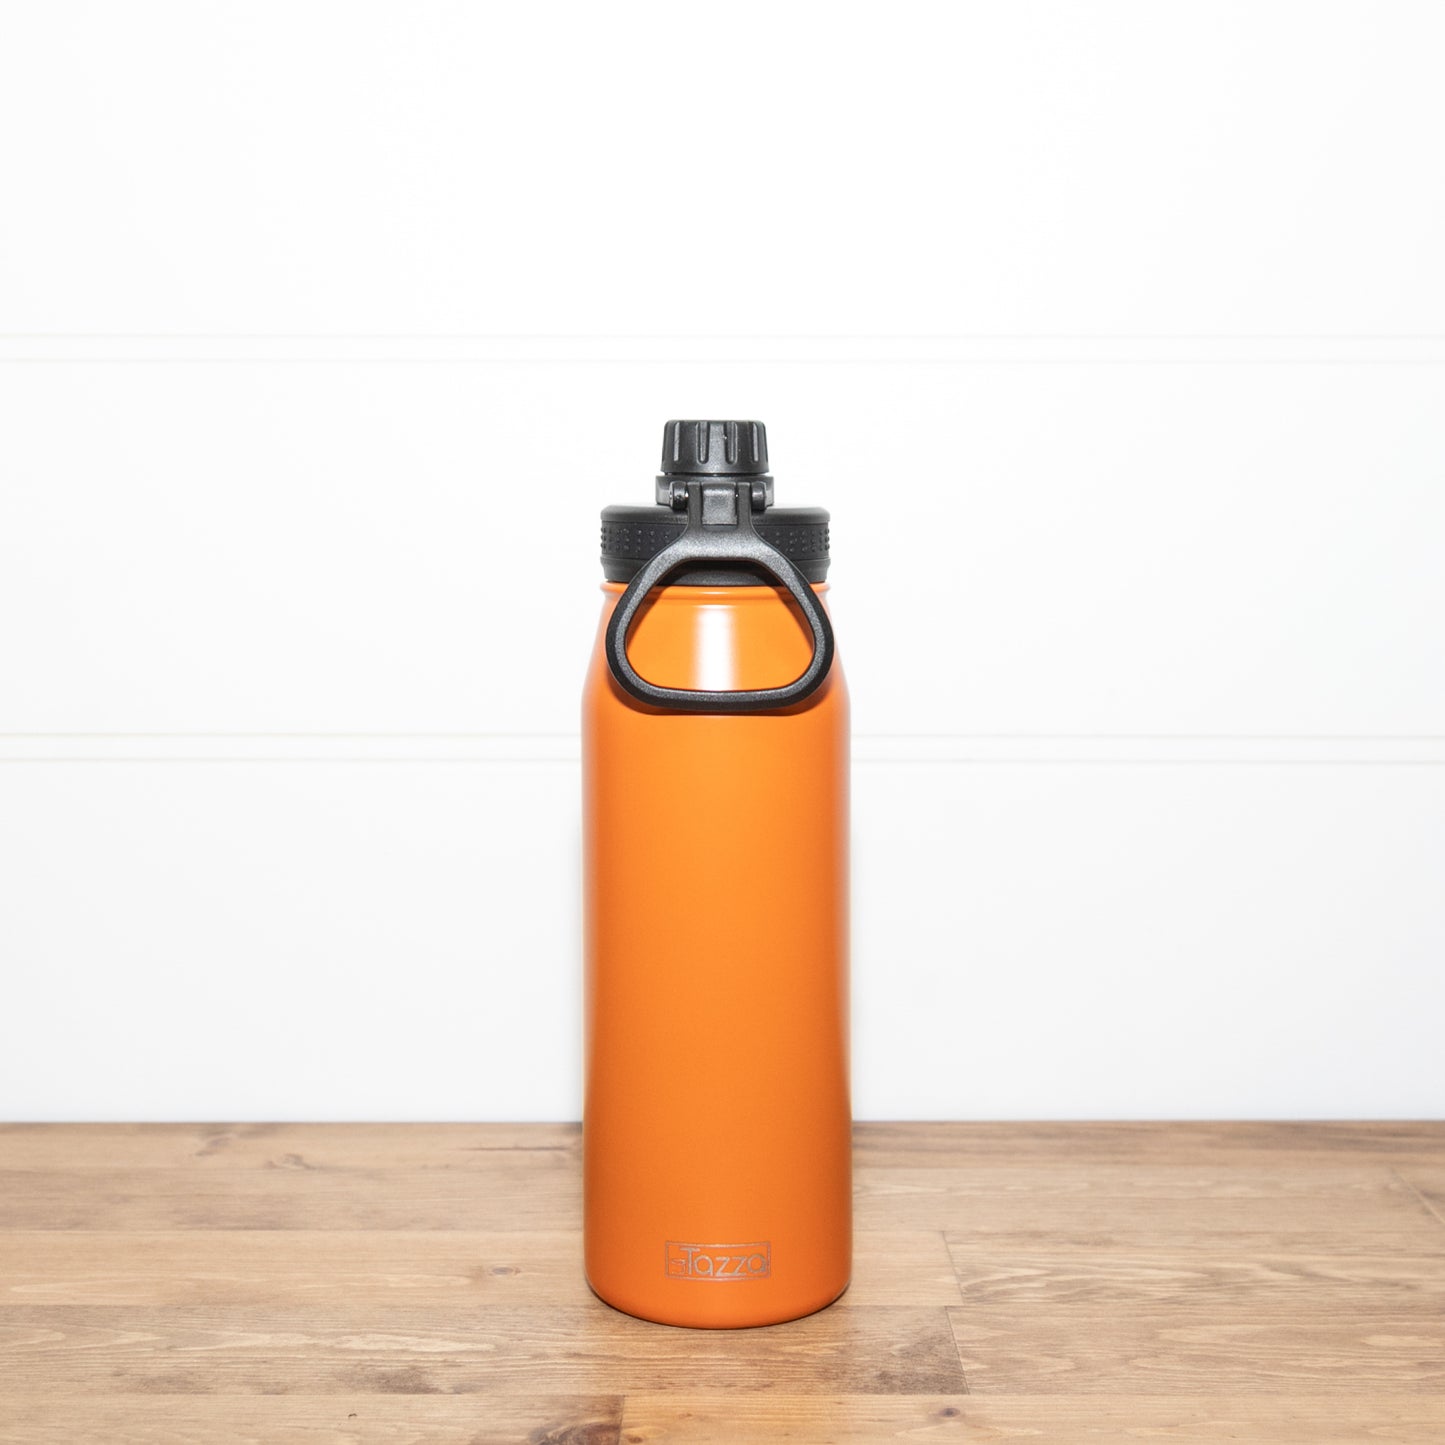 Orange Stainless Steel Sports Bottle for Lasers